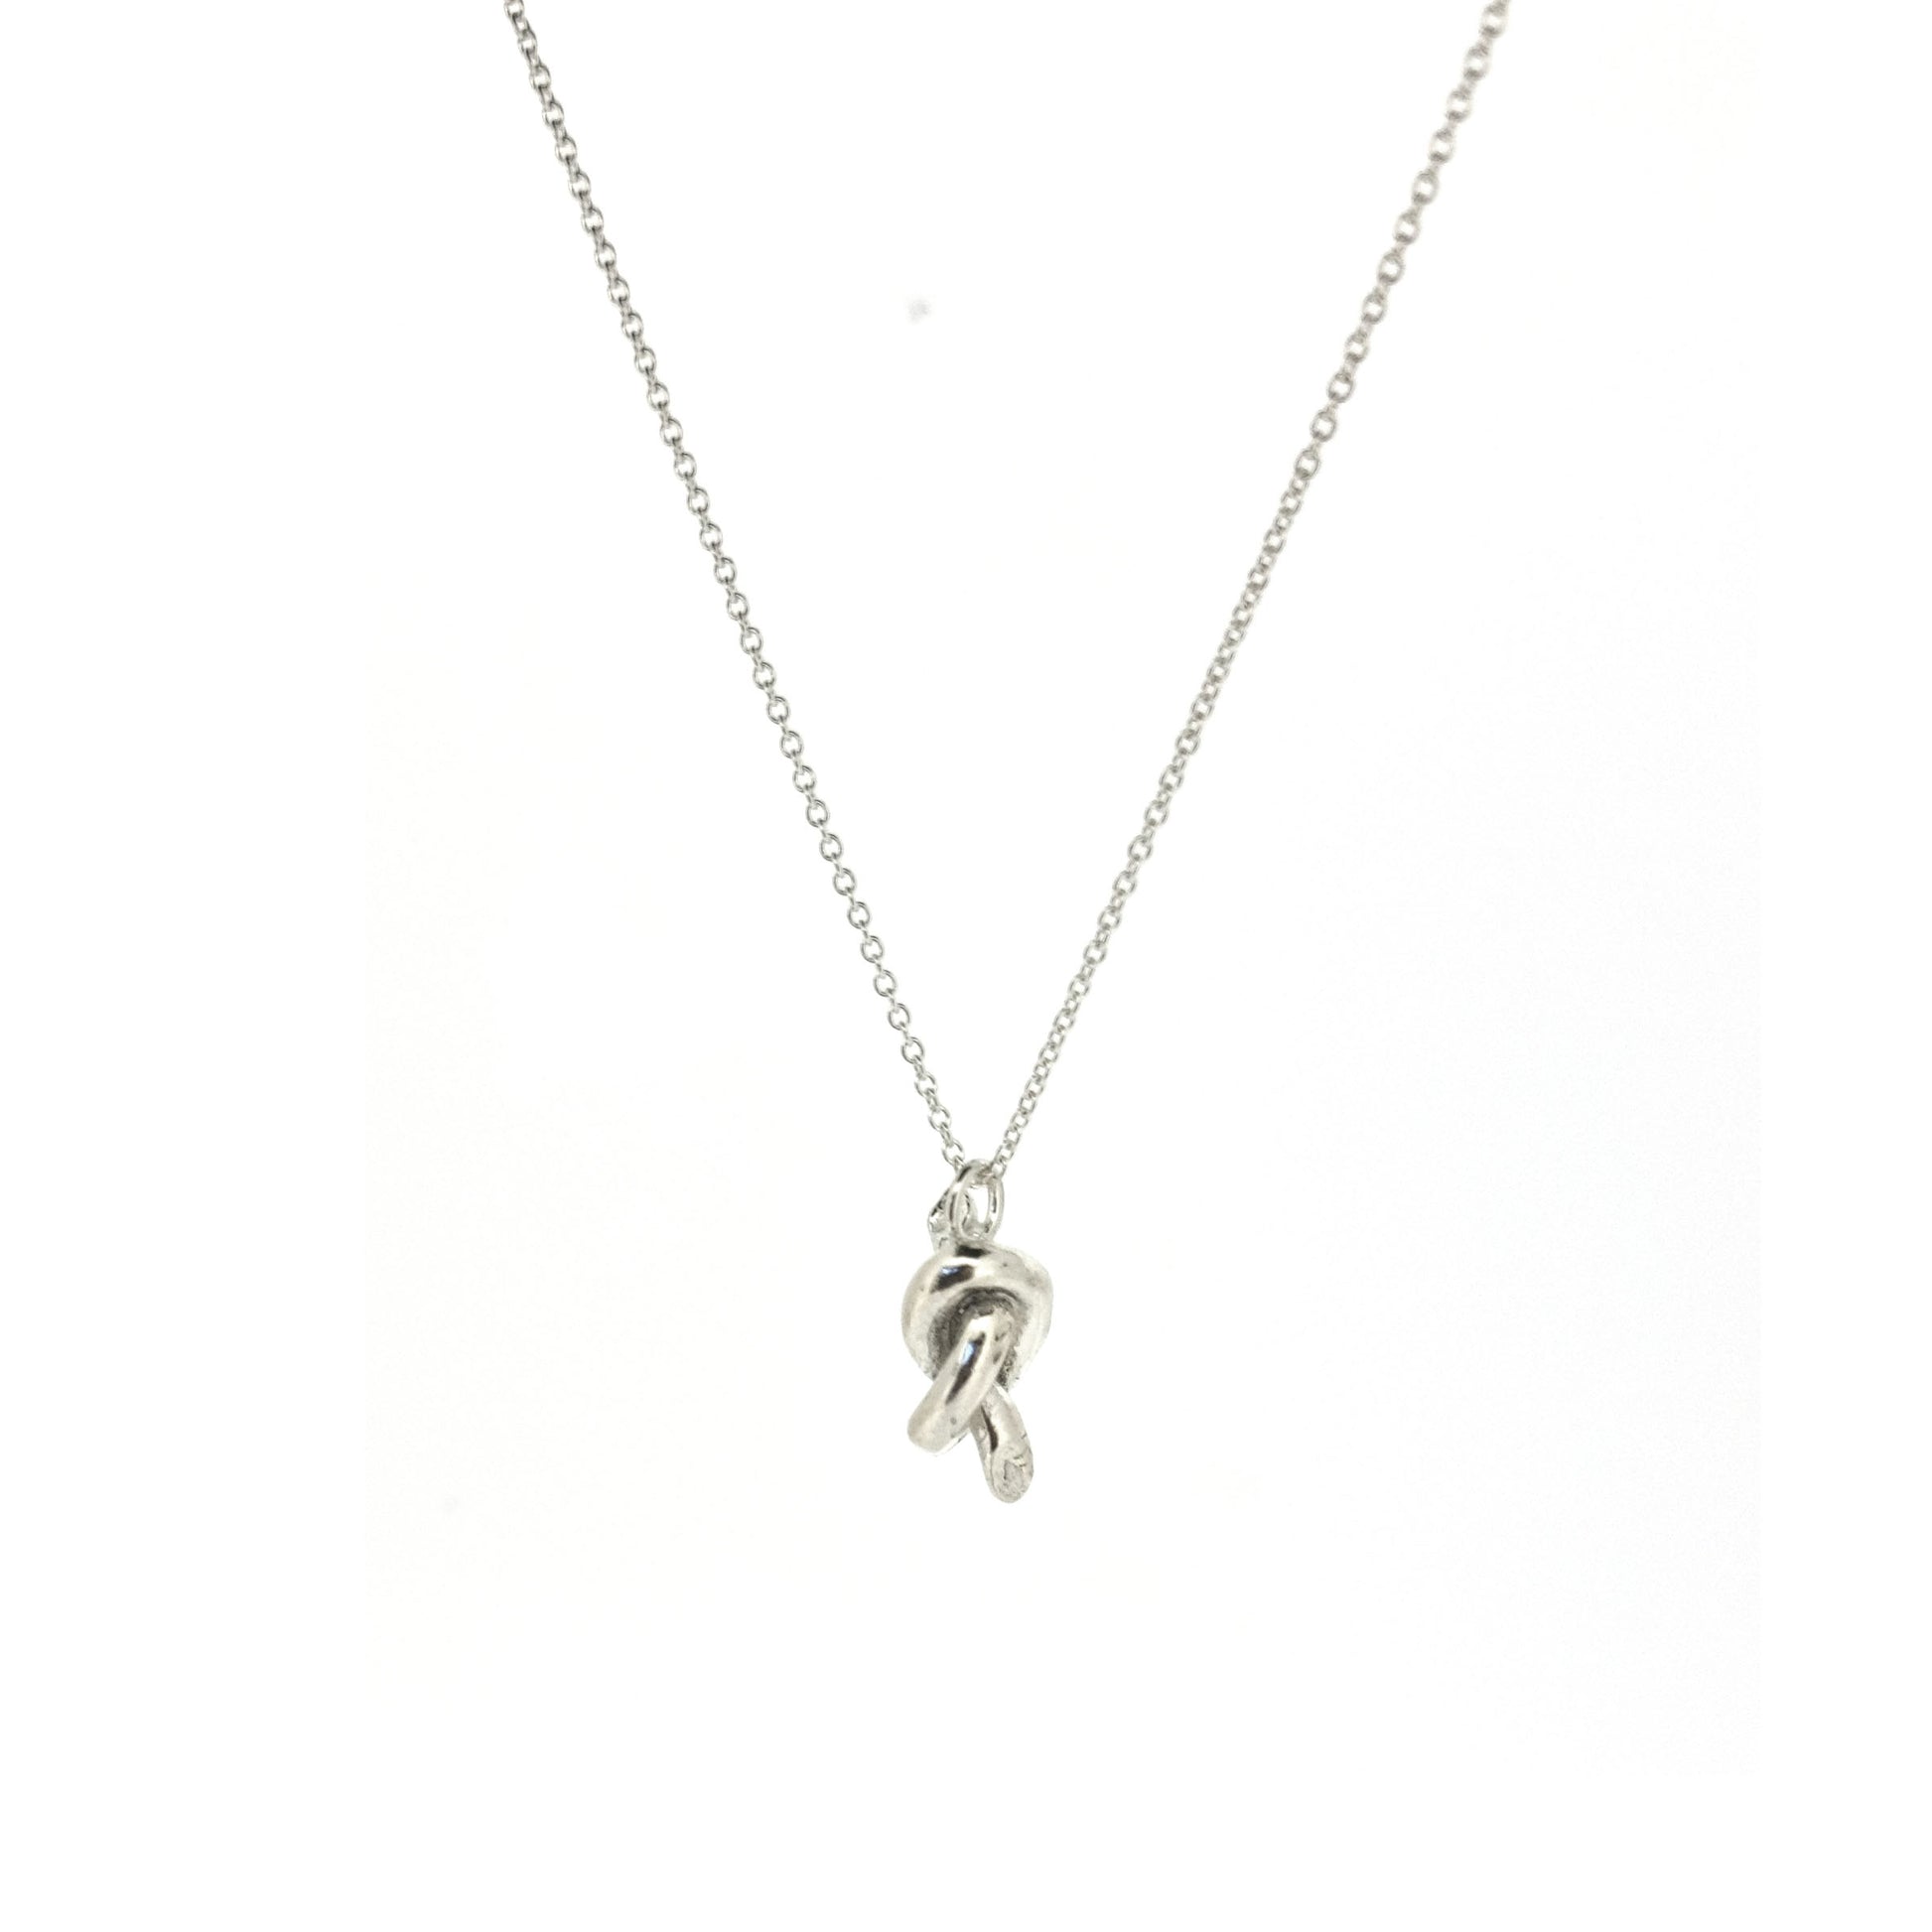 Silver chain with a silver knot pendant.